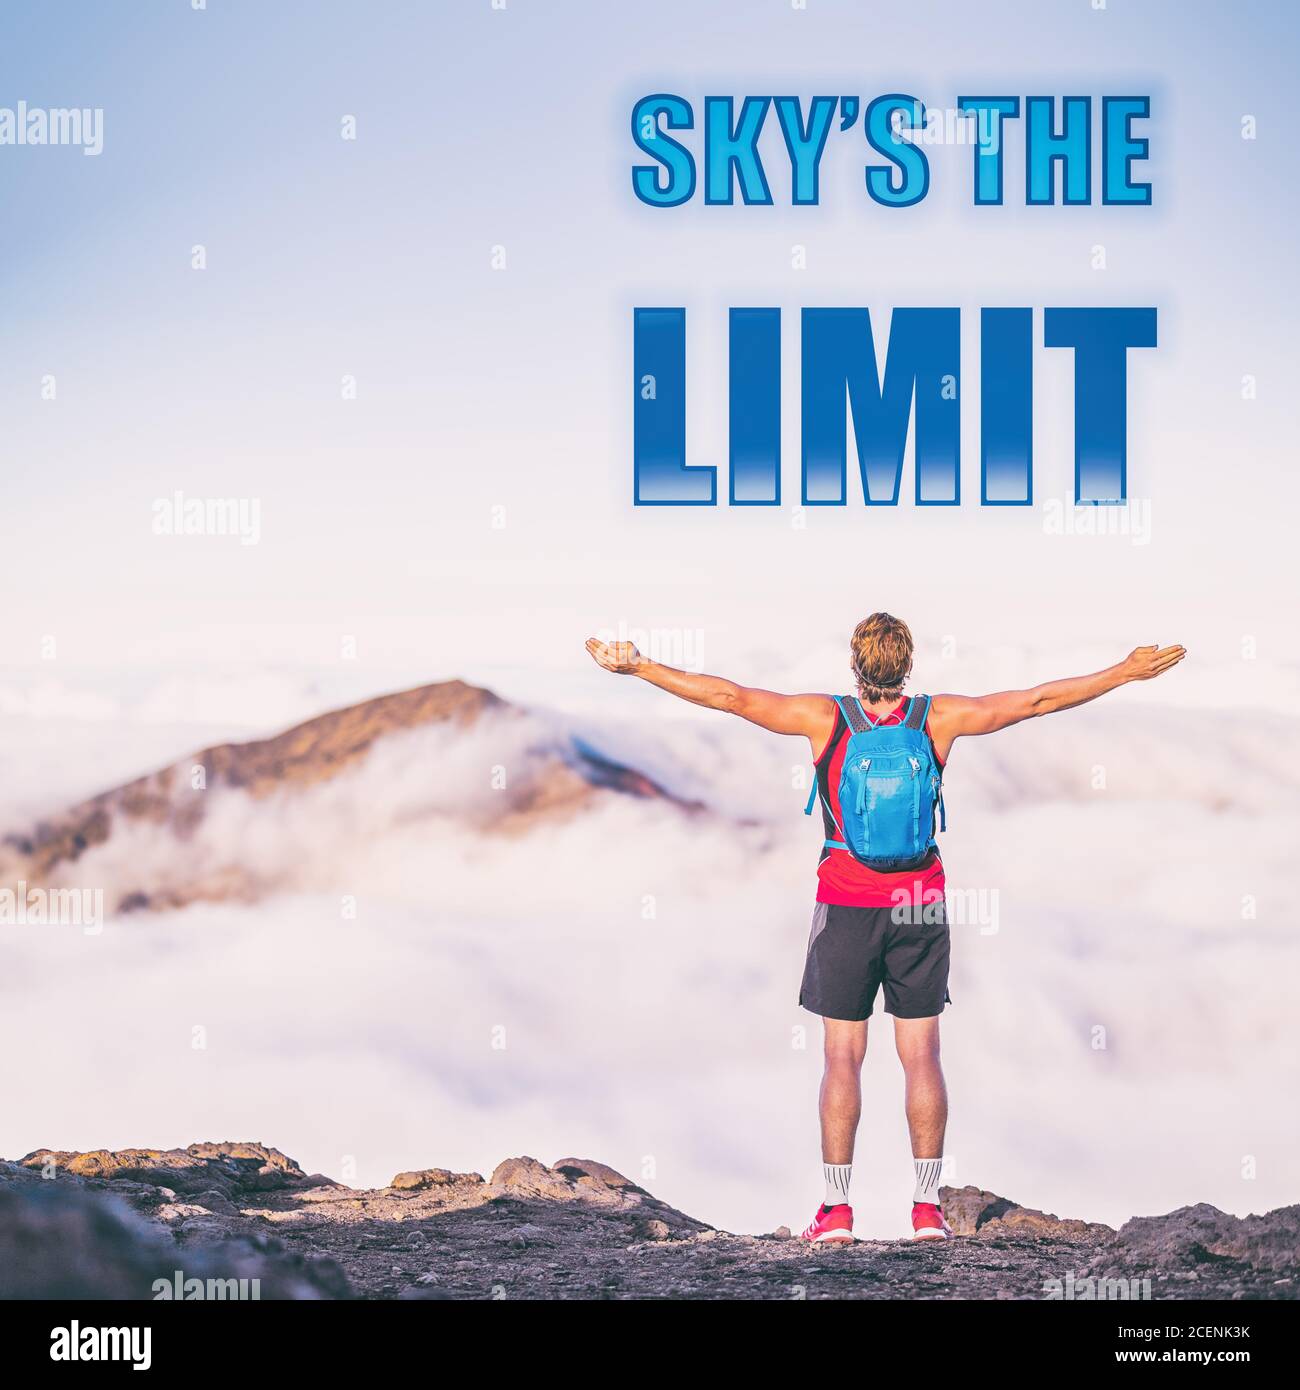 SKY'S THE LIMIT motivation quote on adventure lifestyle background written on sky copy space. Man with open arms in happiness and freedom active Stock Photo